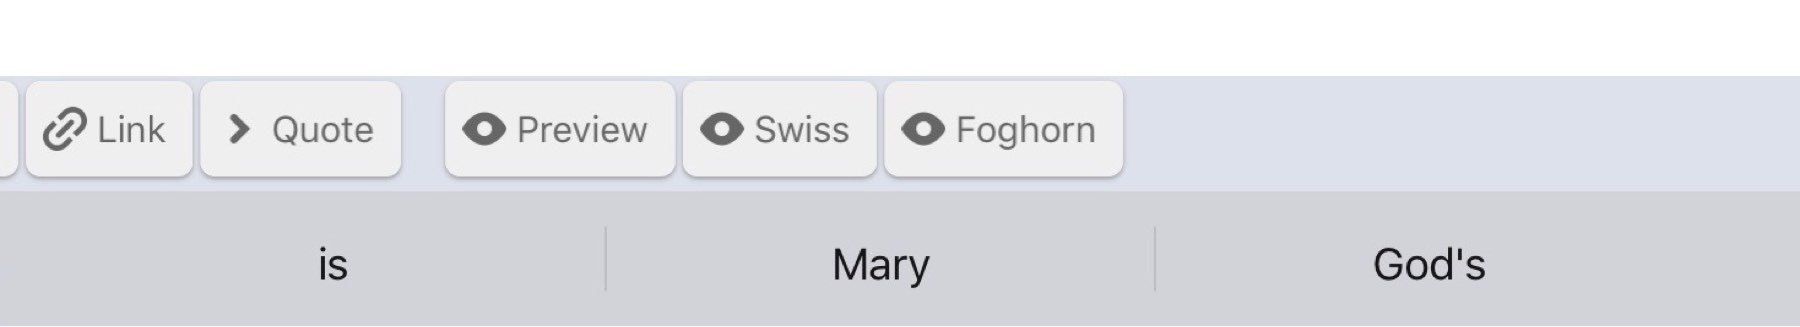 is, Mary, God's